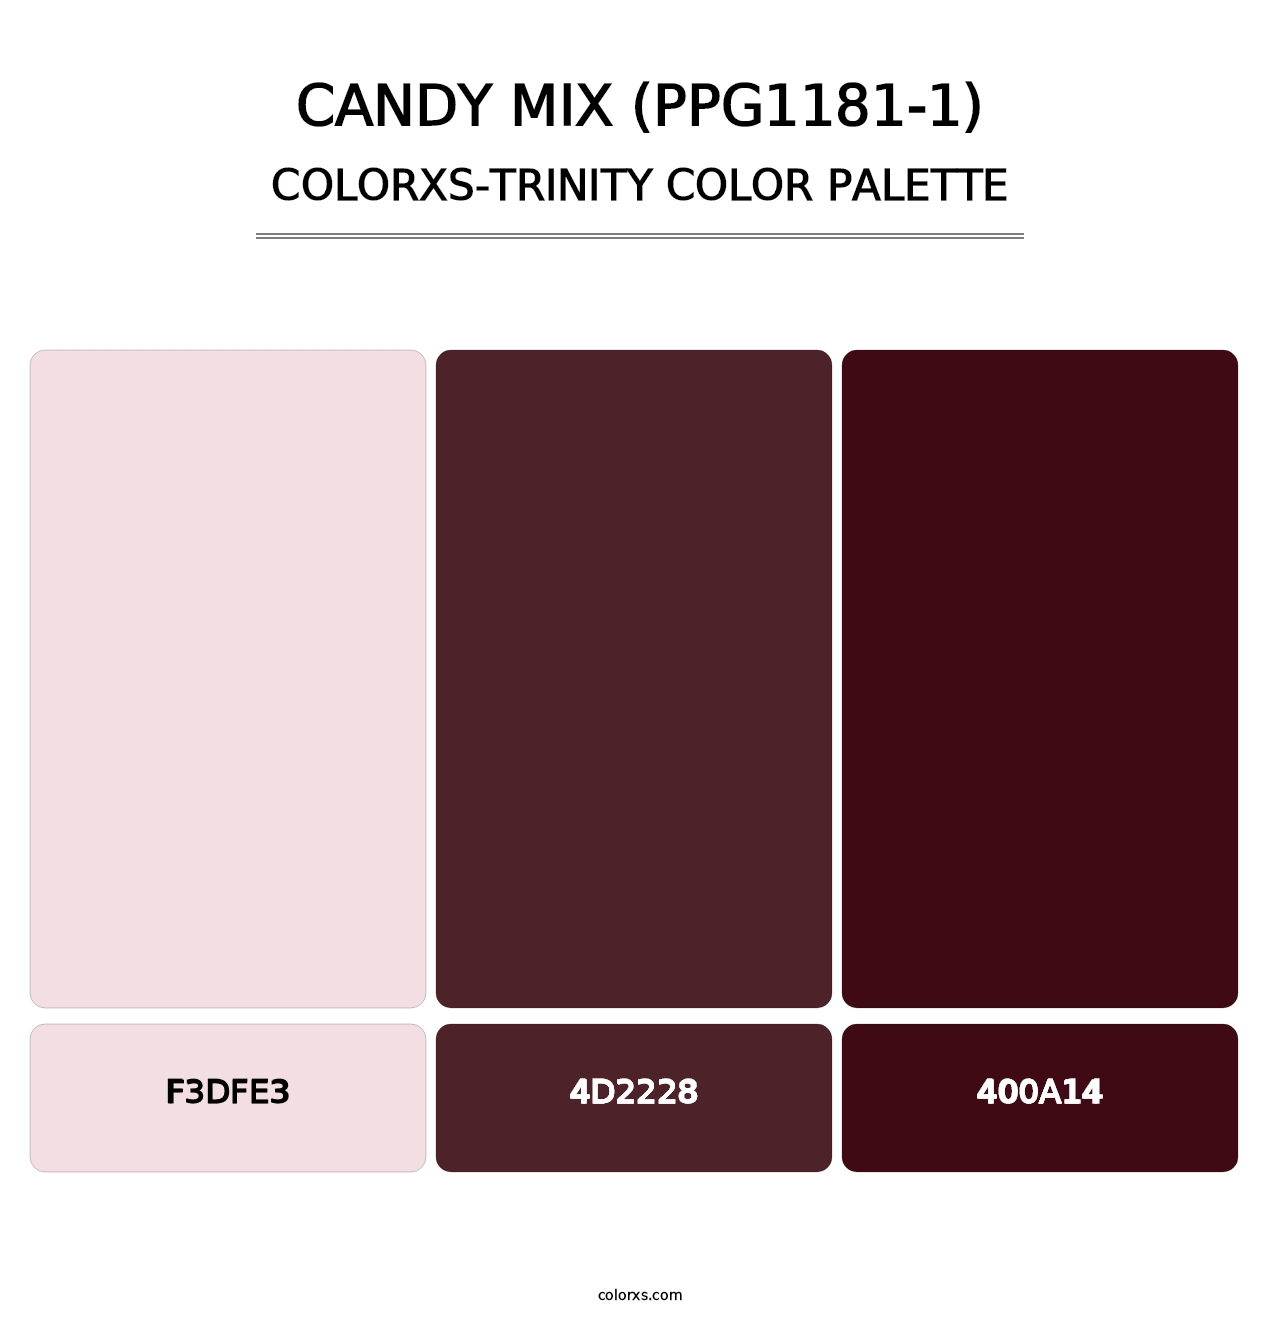 Candy Mix (PPG1181-1) - Colorxs Trinity Palette